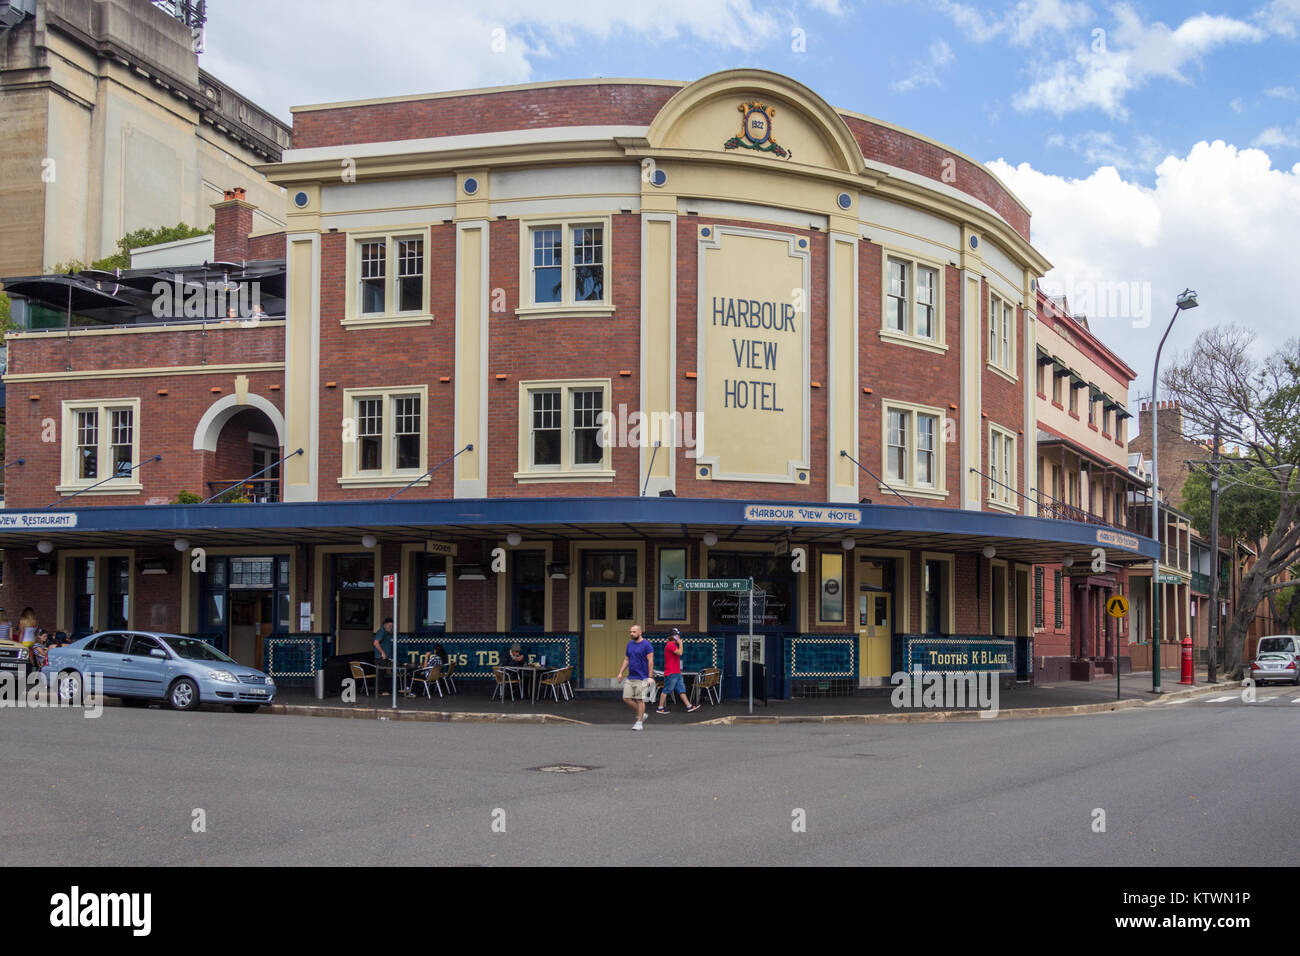 The Harbour View Hotel, Lower Fort Street, The Rocks, Sydney, New South Wales, NSW, Australia Stock Photo